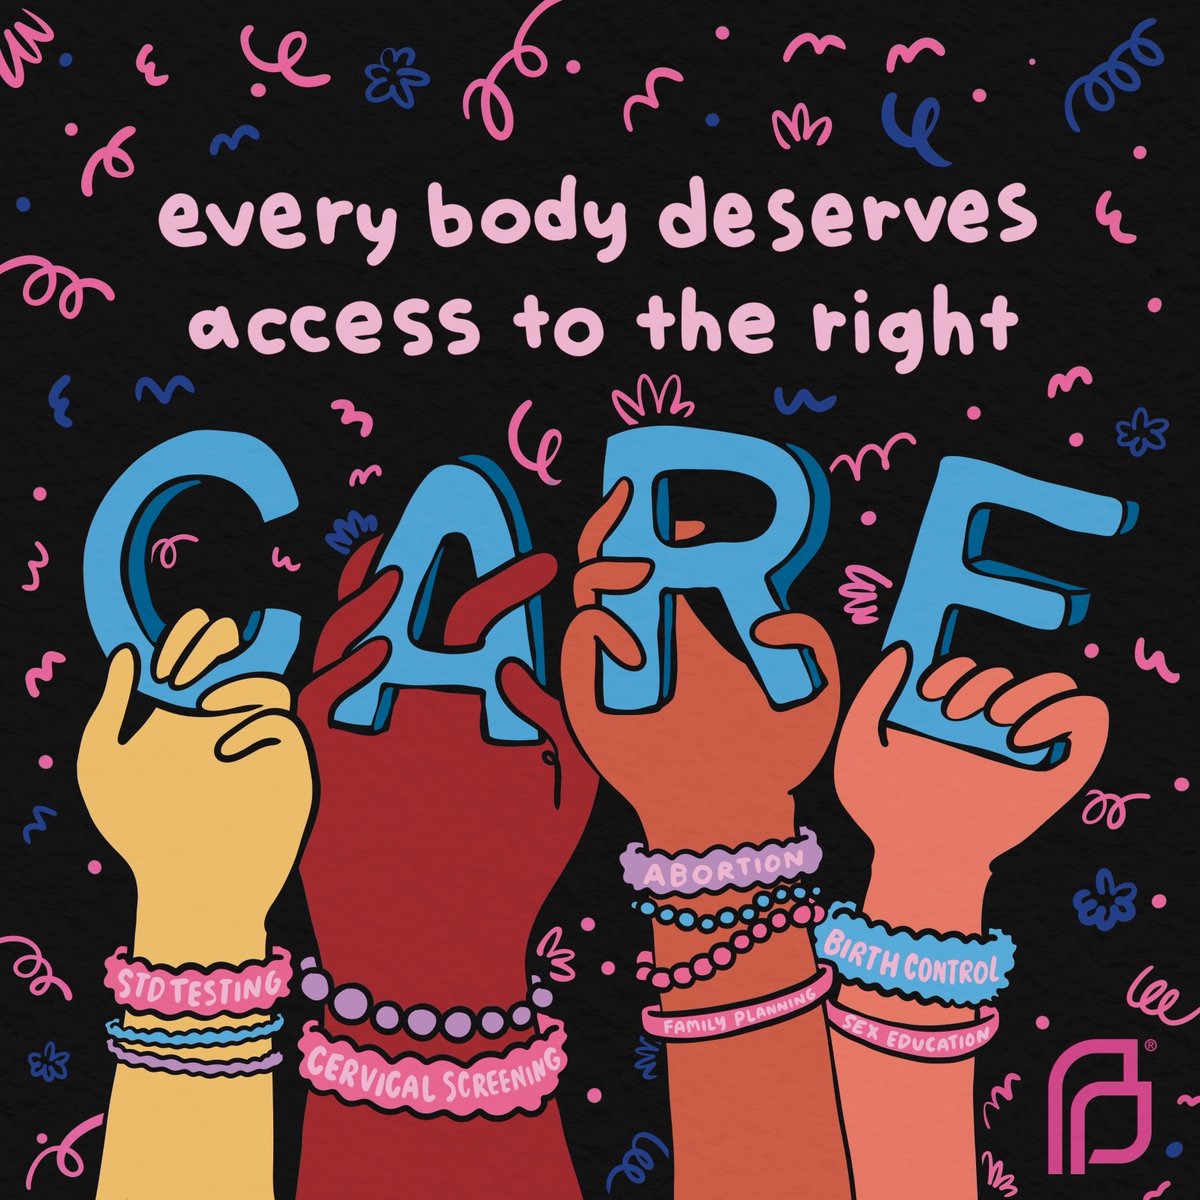 ✨Everyone✨ deserves access to the care they need. Whether that's birth control, transgender hormone therapy, abortion, or other sexual and reproductive health care.